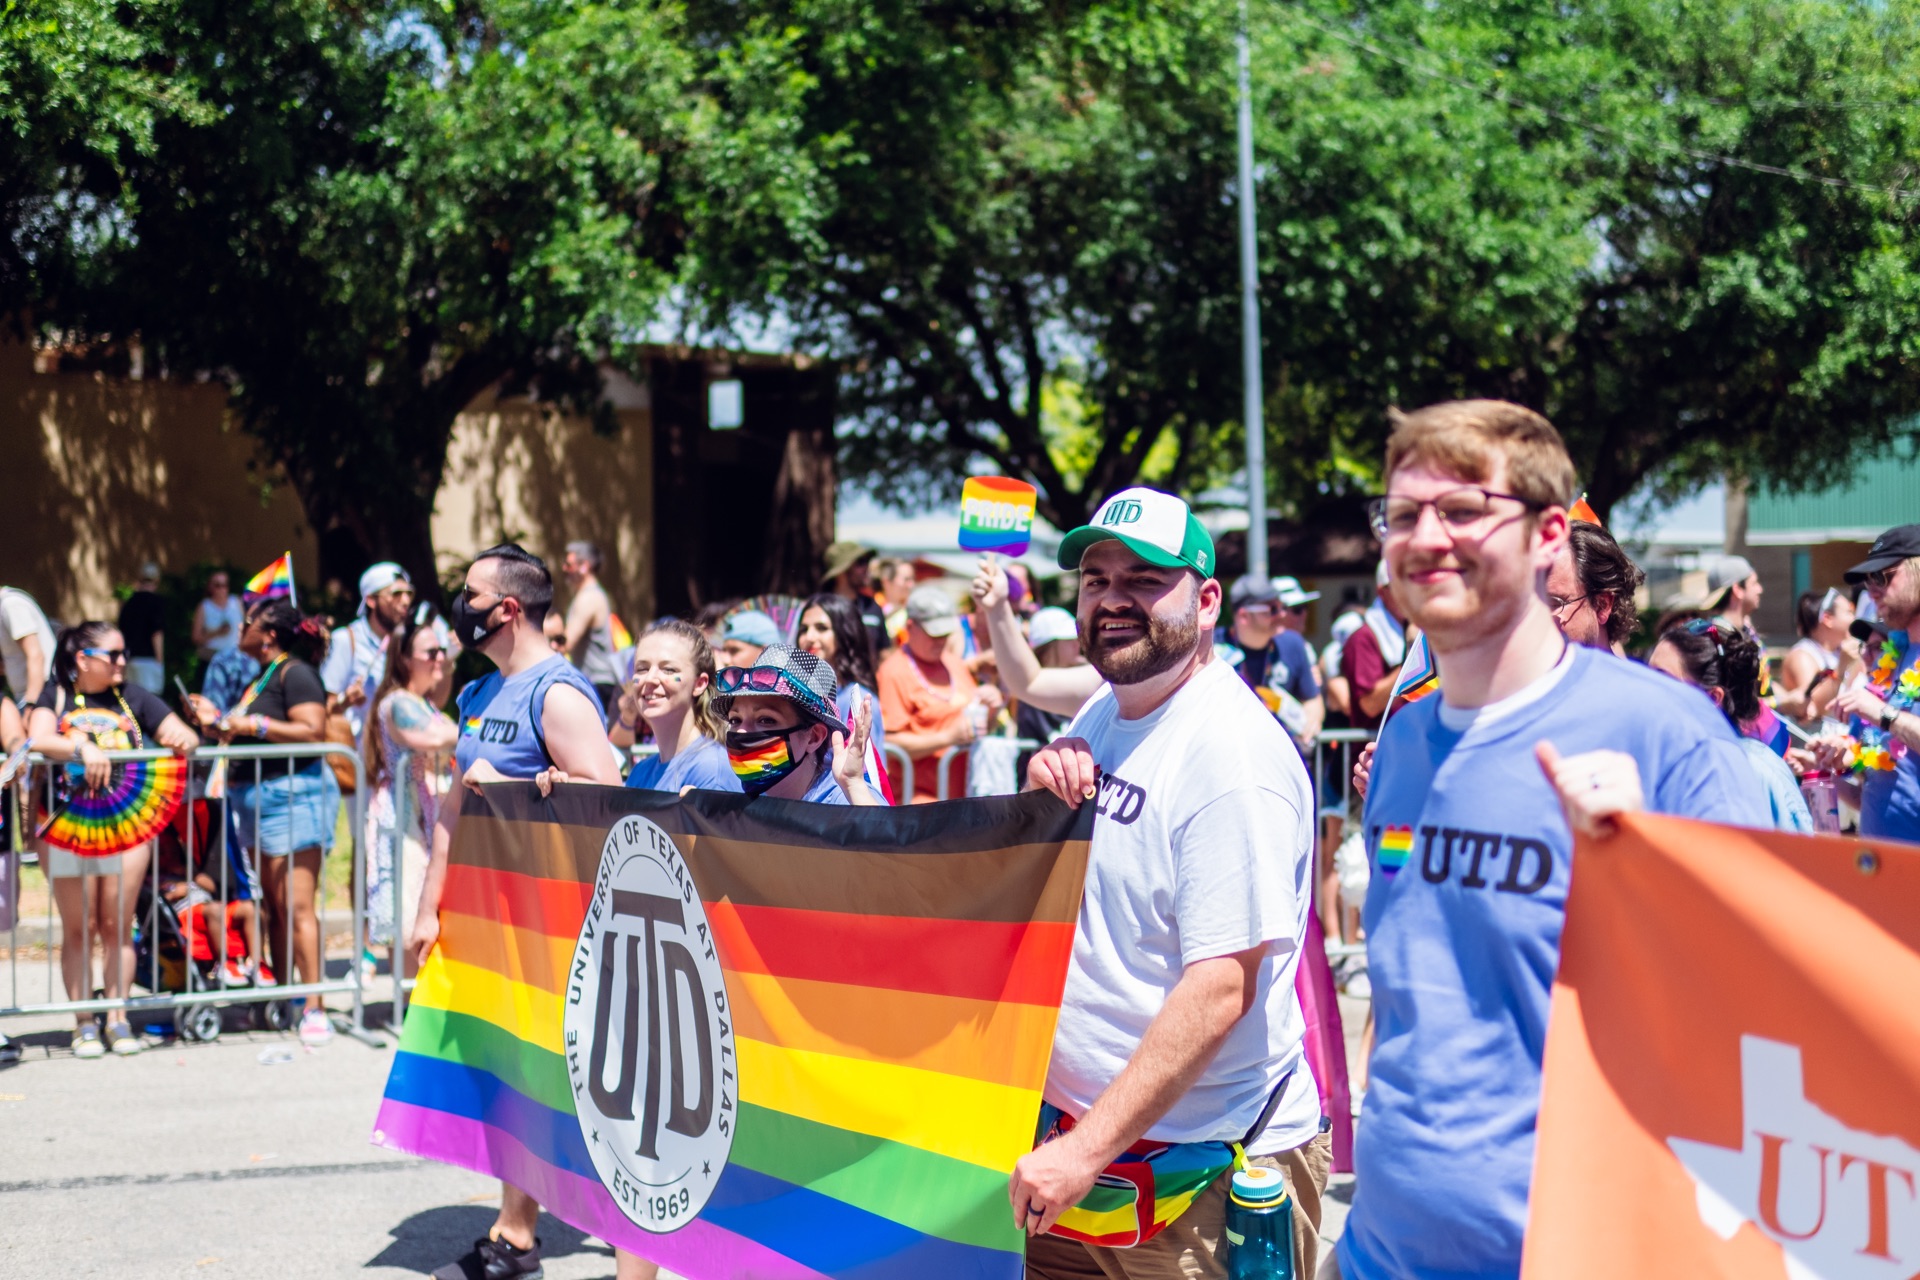 The UTD Dallas Pride Parade Marchers Holding Up Banners